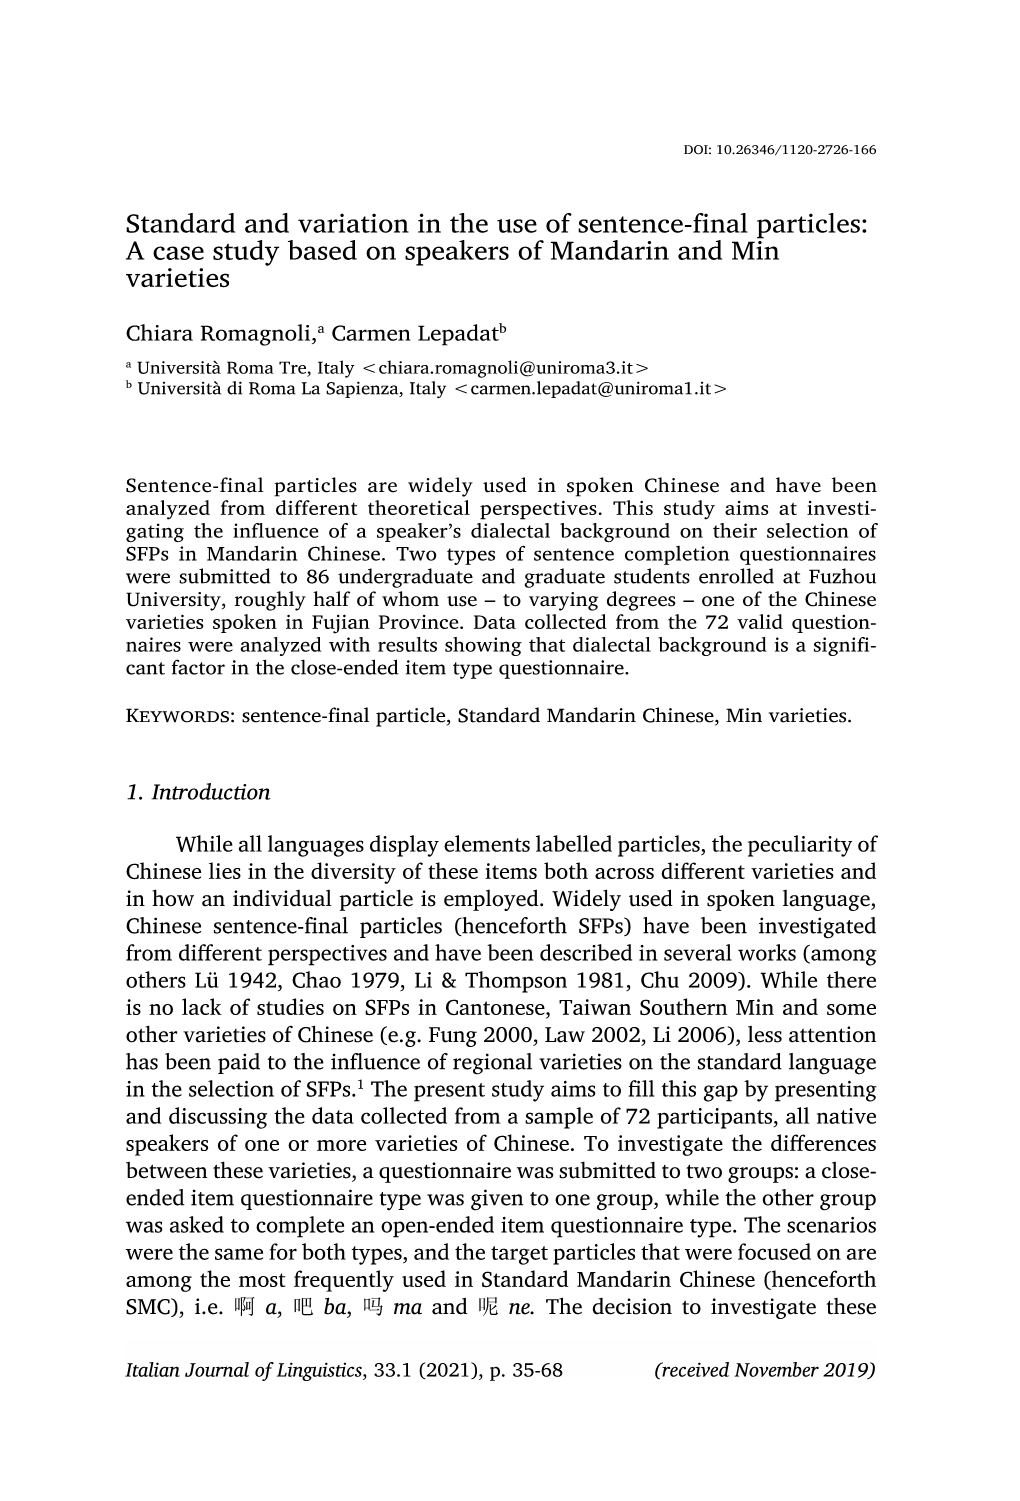 Standard and Variation in the Use of Sentence-Final Particles: a Case Study Based on Speakers of Mandarin and Min Varieties